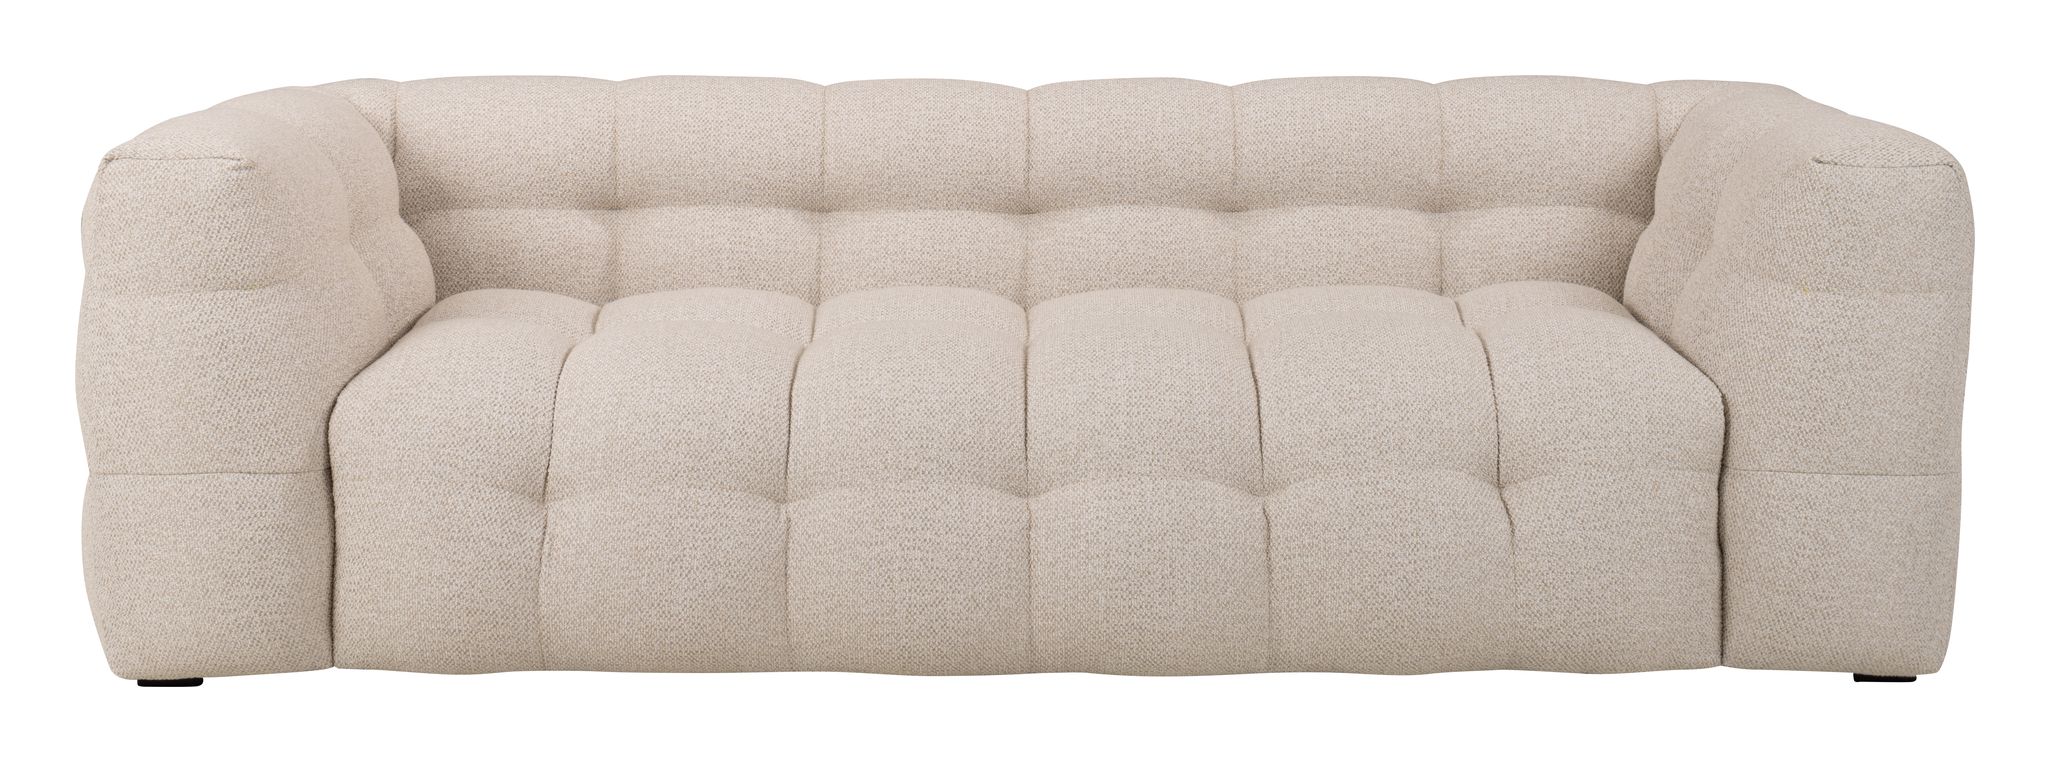 Image of Hudson 3-pers Sofa, Beige boucl